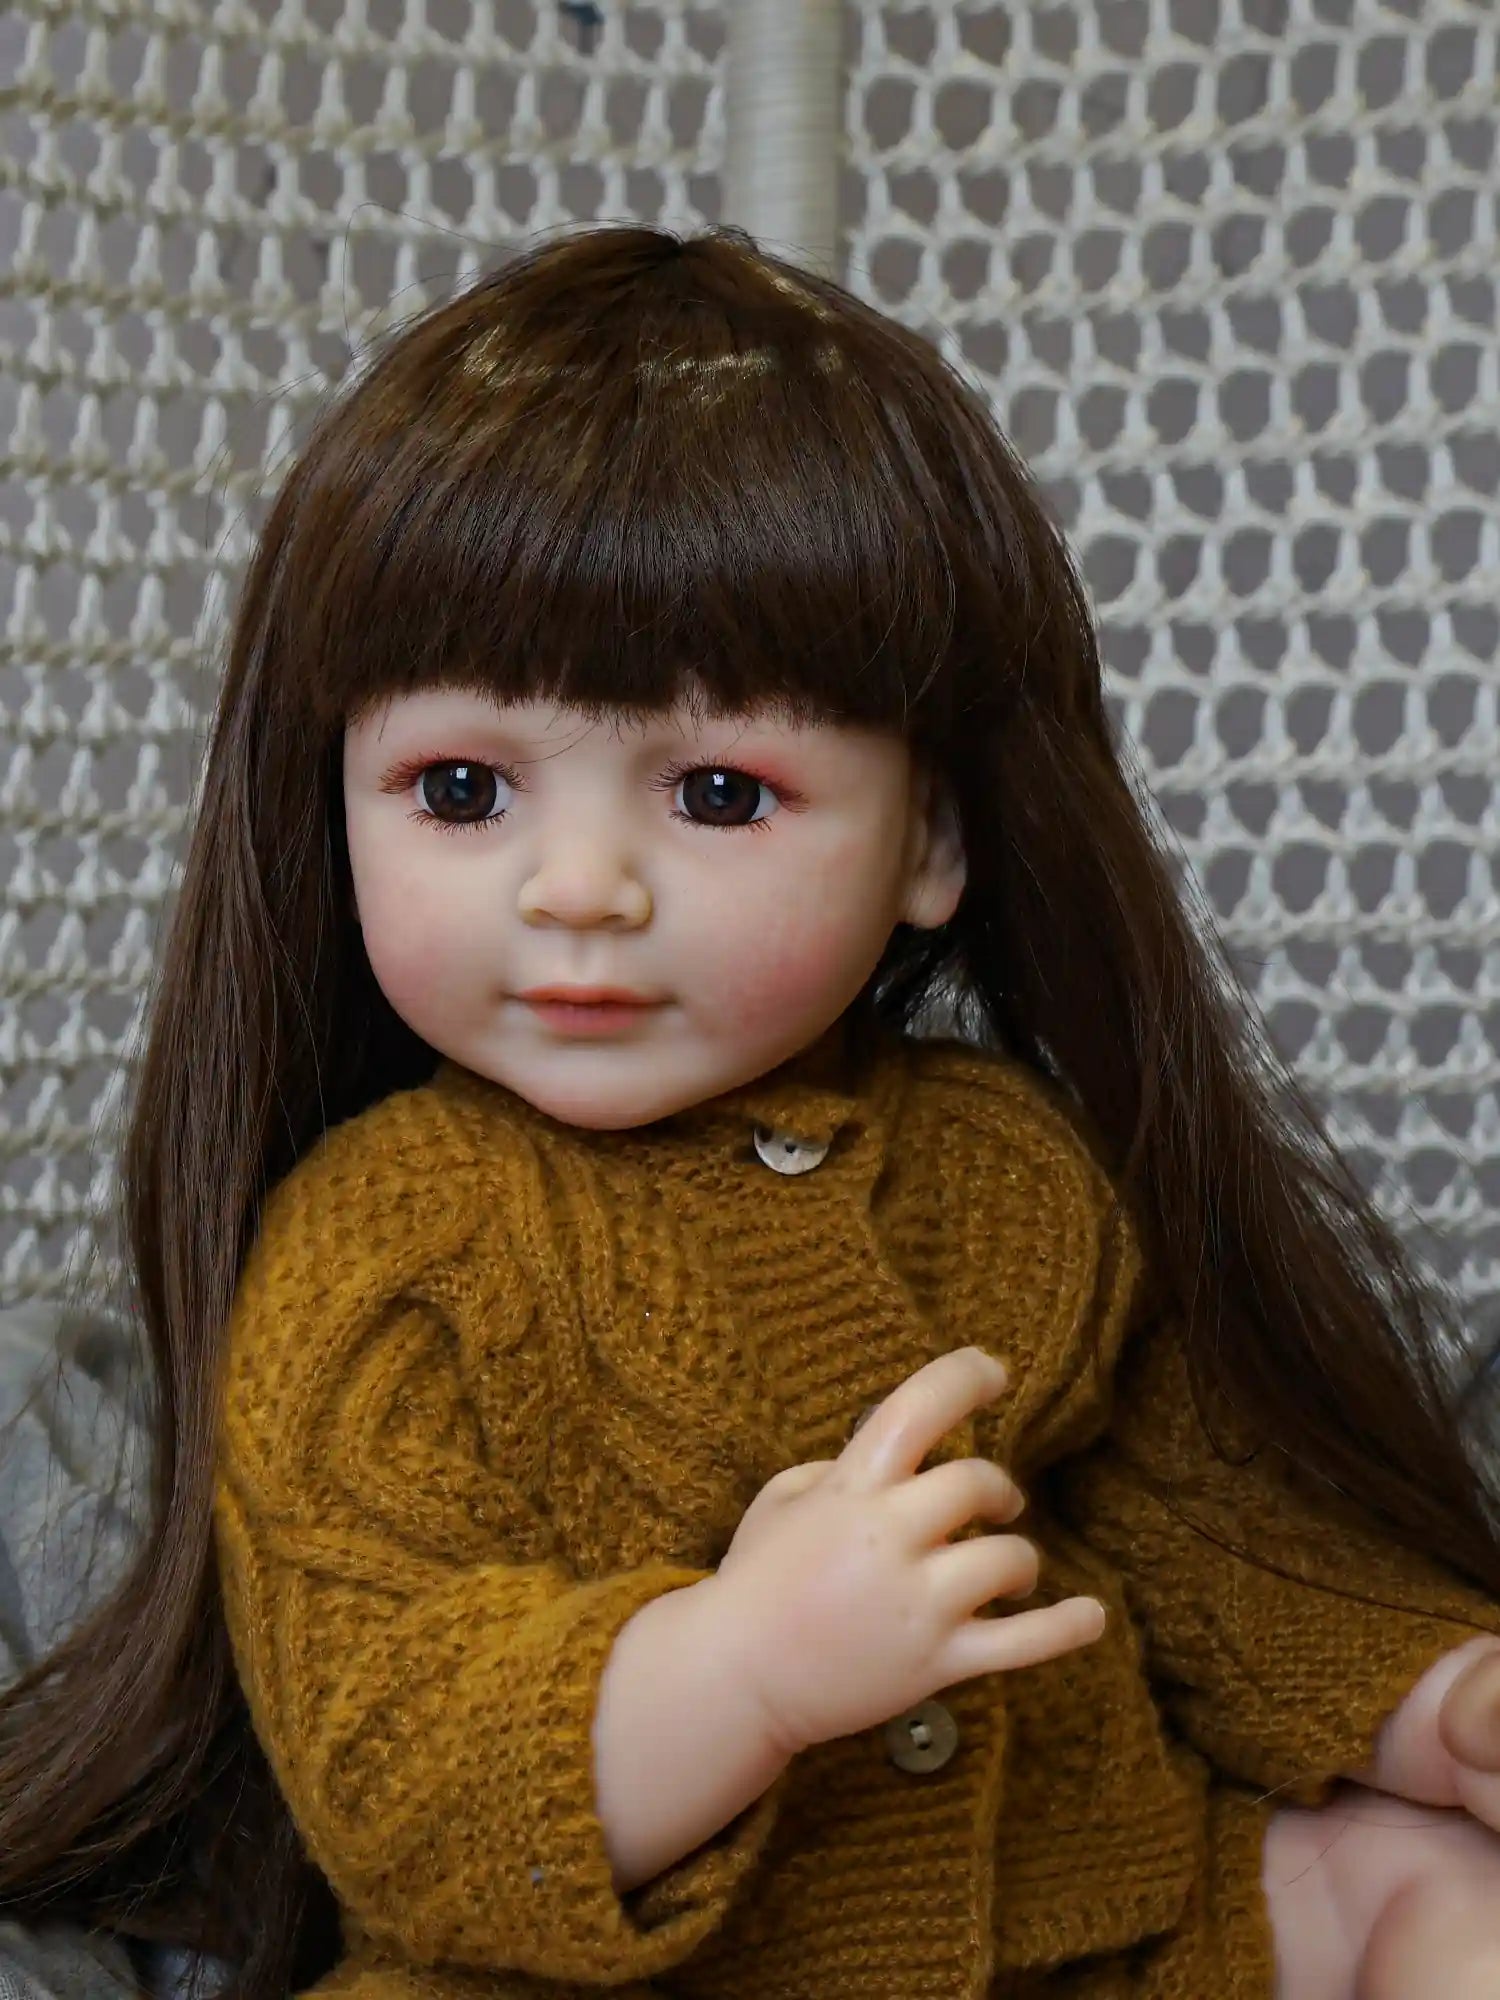 Realistic seated doll with dark brown hair and eyes, wearing a cozy mustard-yellow knit cap and cardigan, with a soft gray cushion as a backdrop.